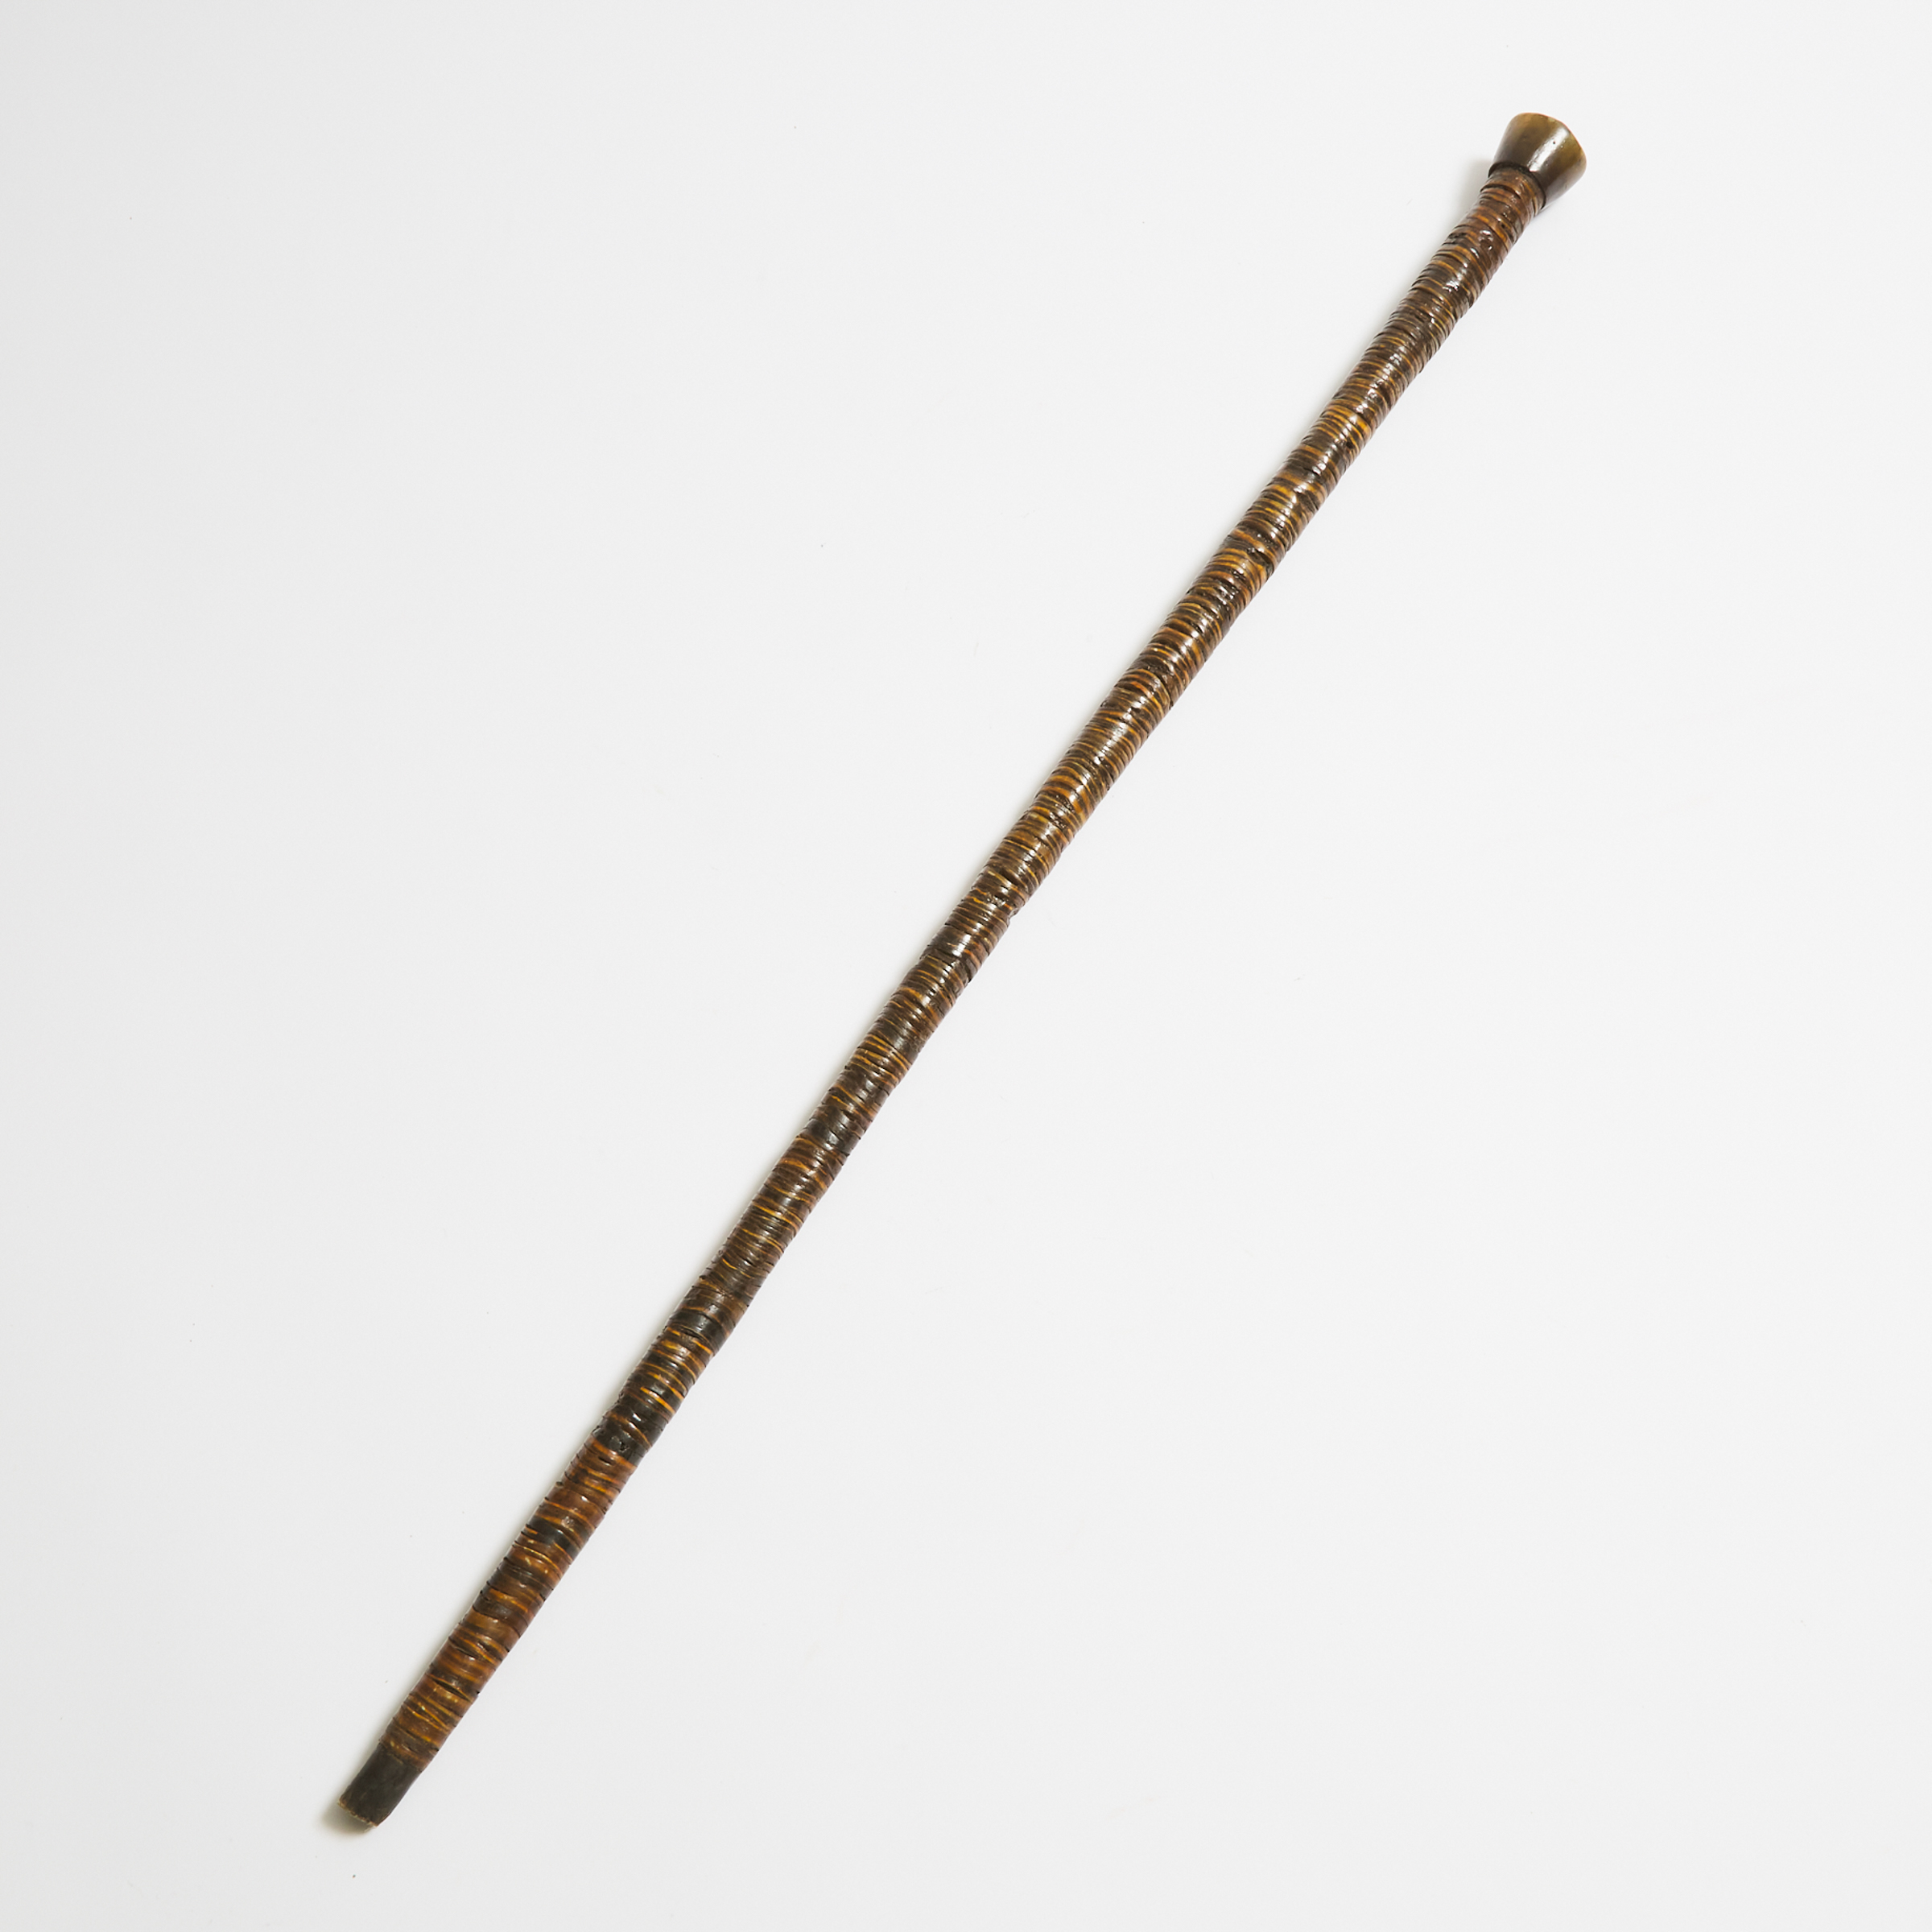 Cattle Prod Walking Stick with Horn Grip, 19th century